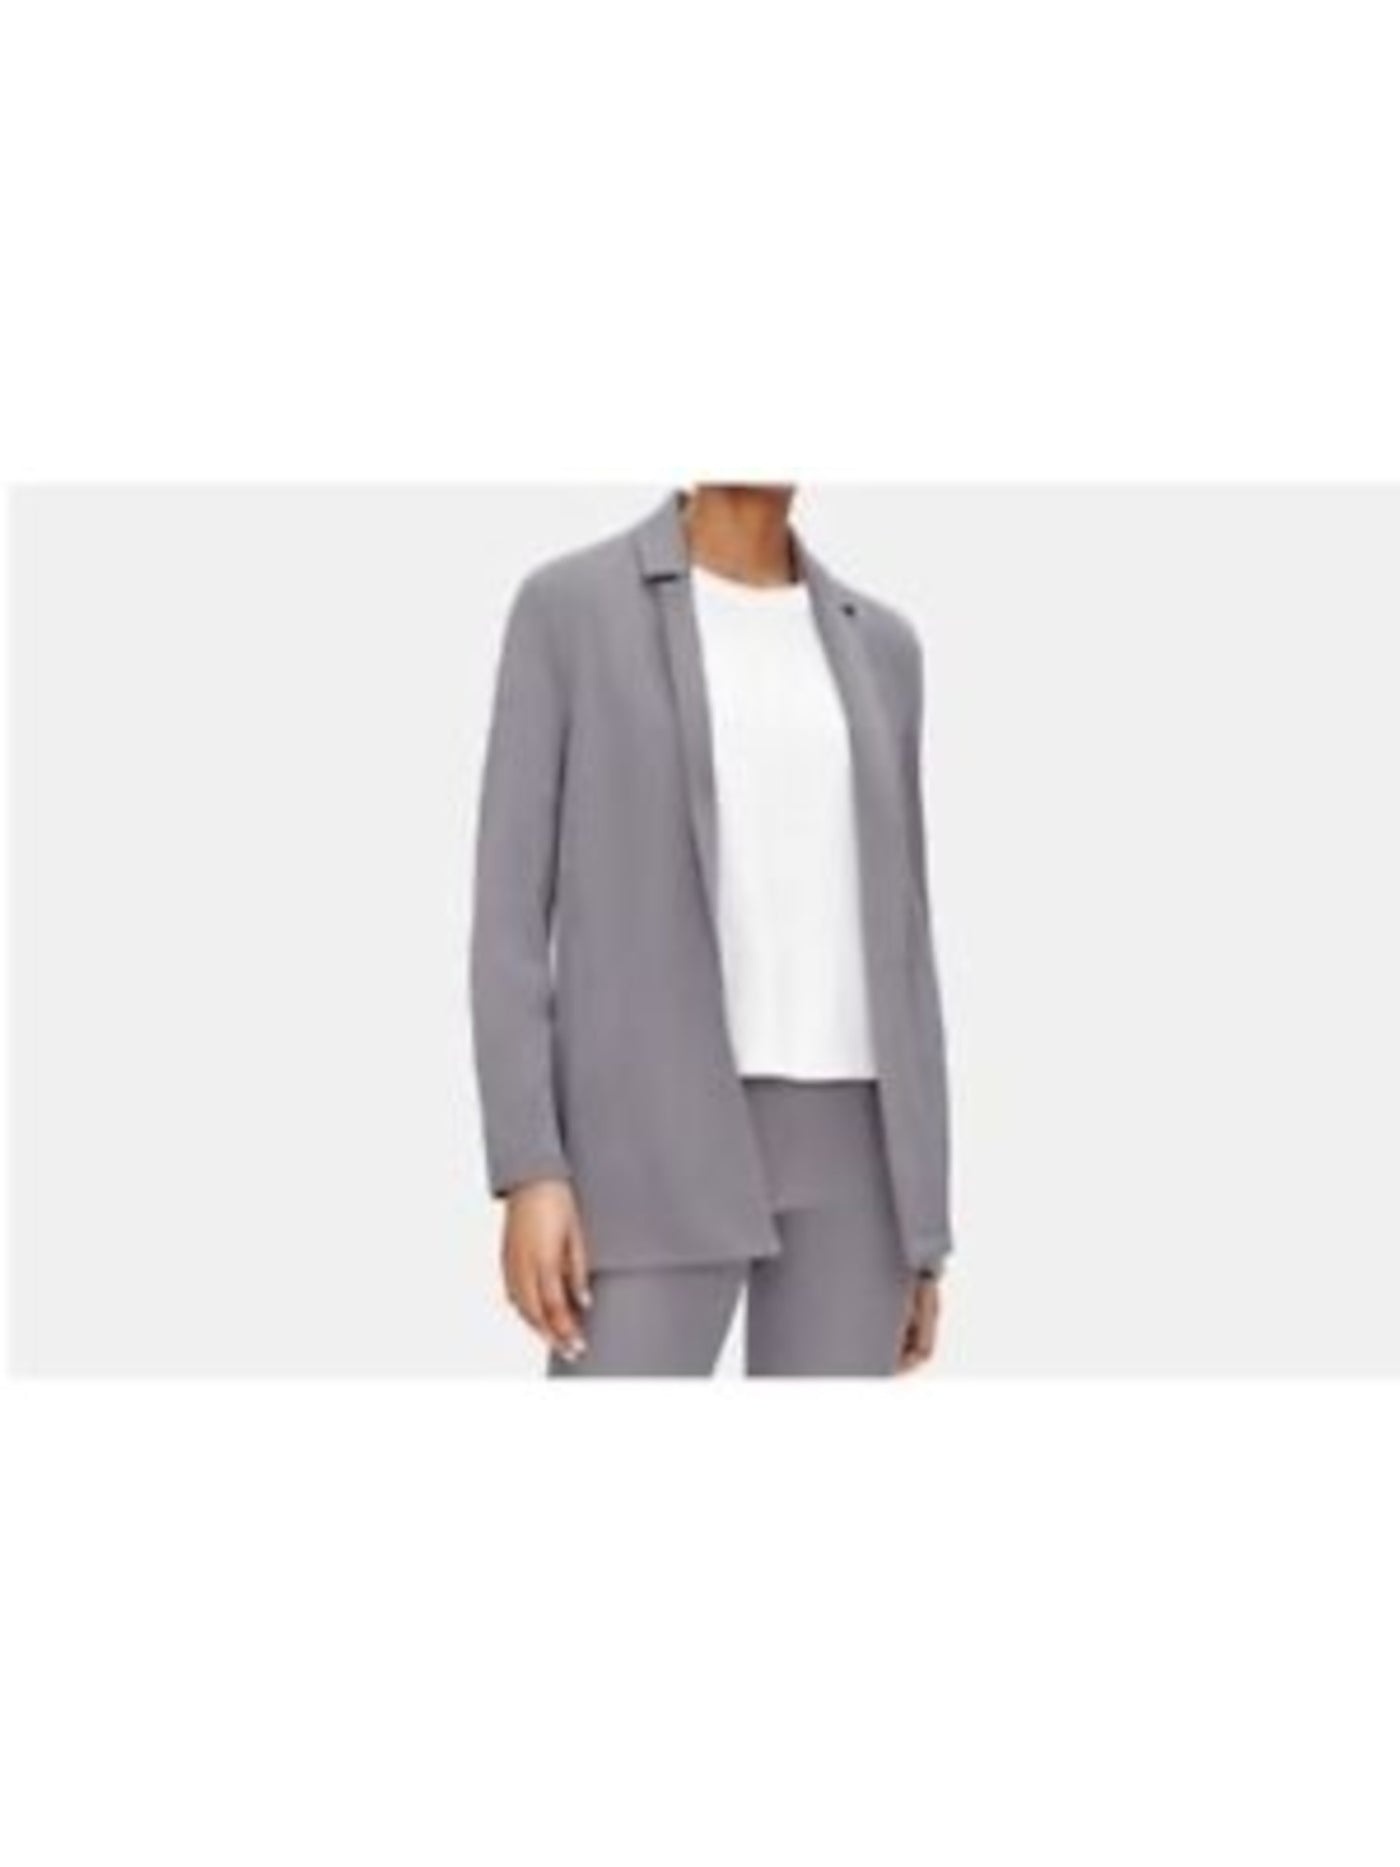 EILEEN FISHER Womens Gray Pocketed Open Front Tencel Notch Collar Vented Back Wear To Work Blazer Jacket L